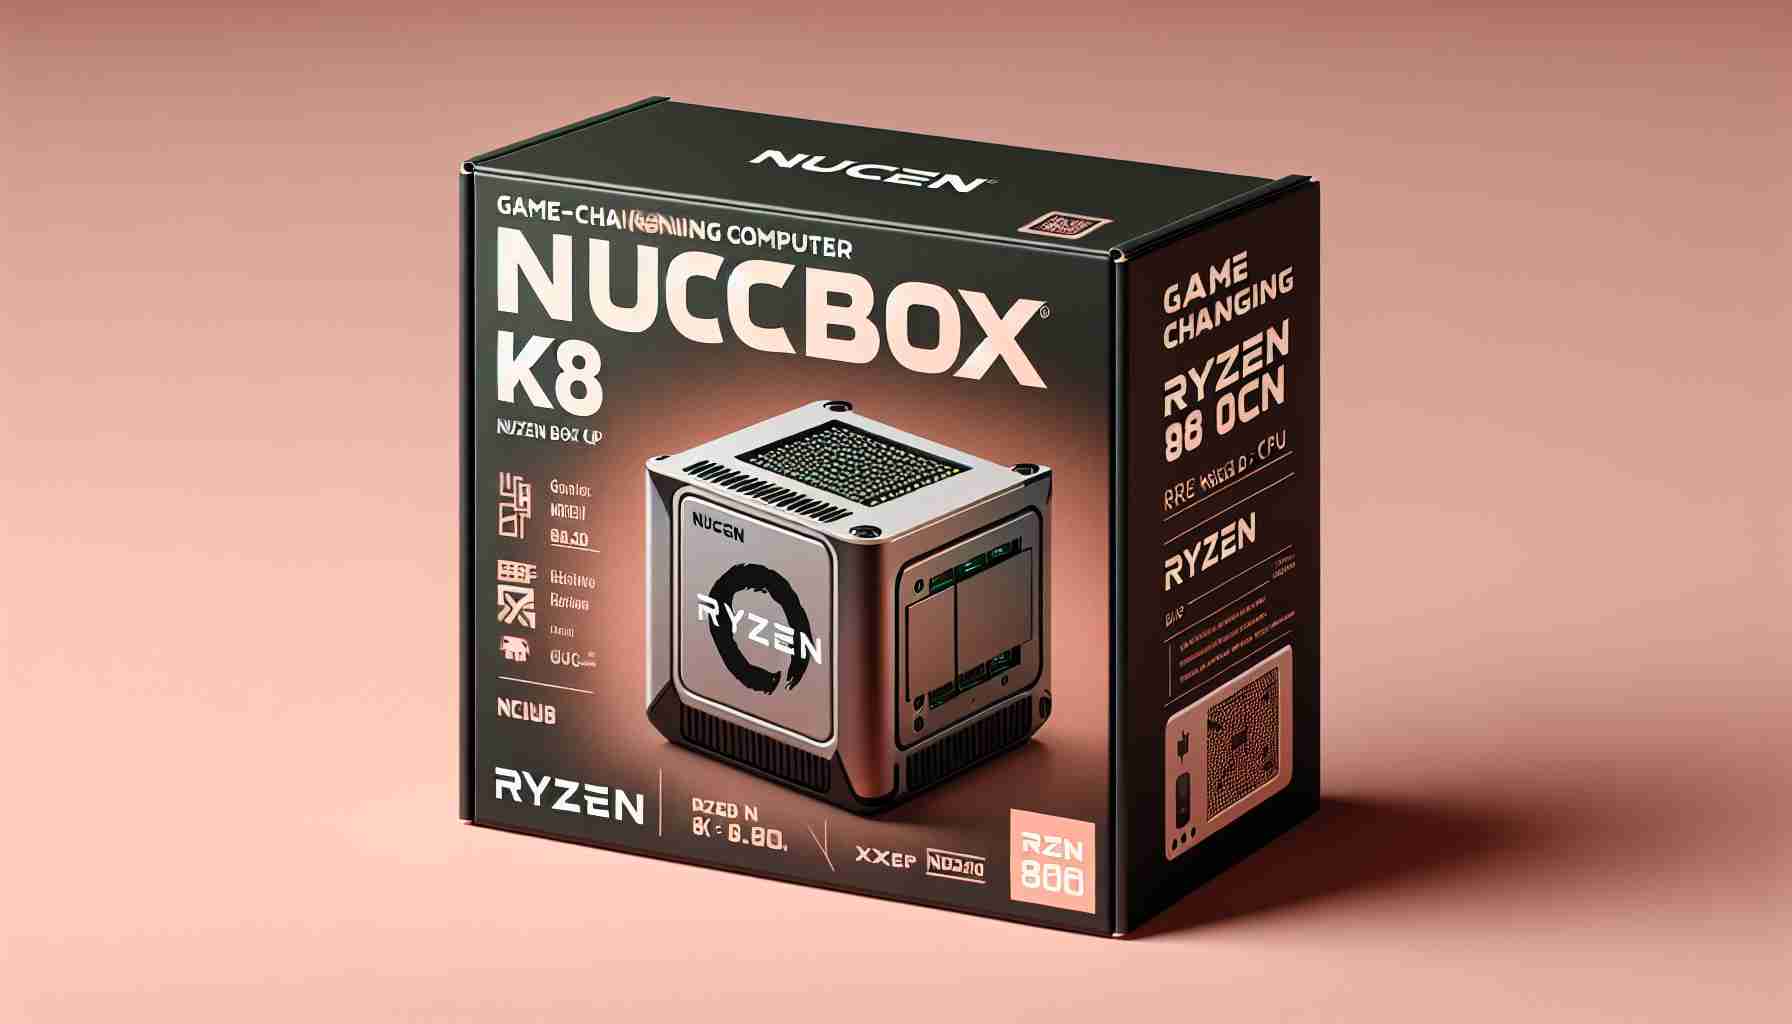 Introducing the NucBox K8: A Game-Changing Mini PC with Ryzen 8000 CPU